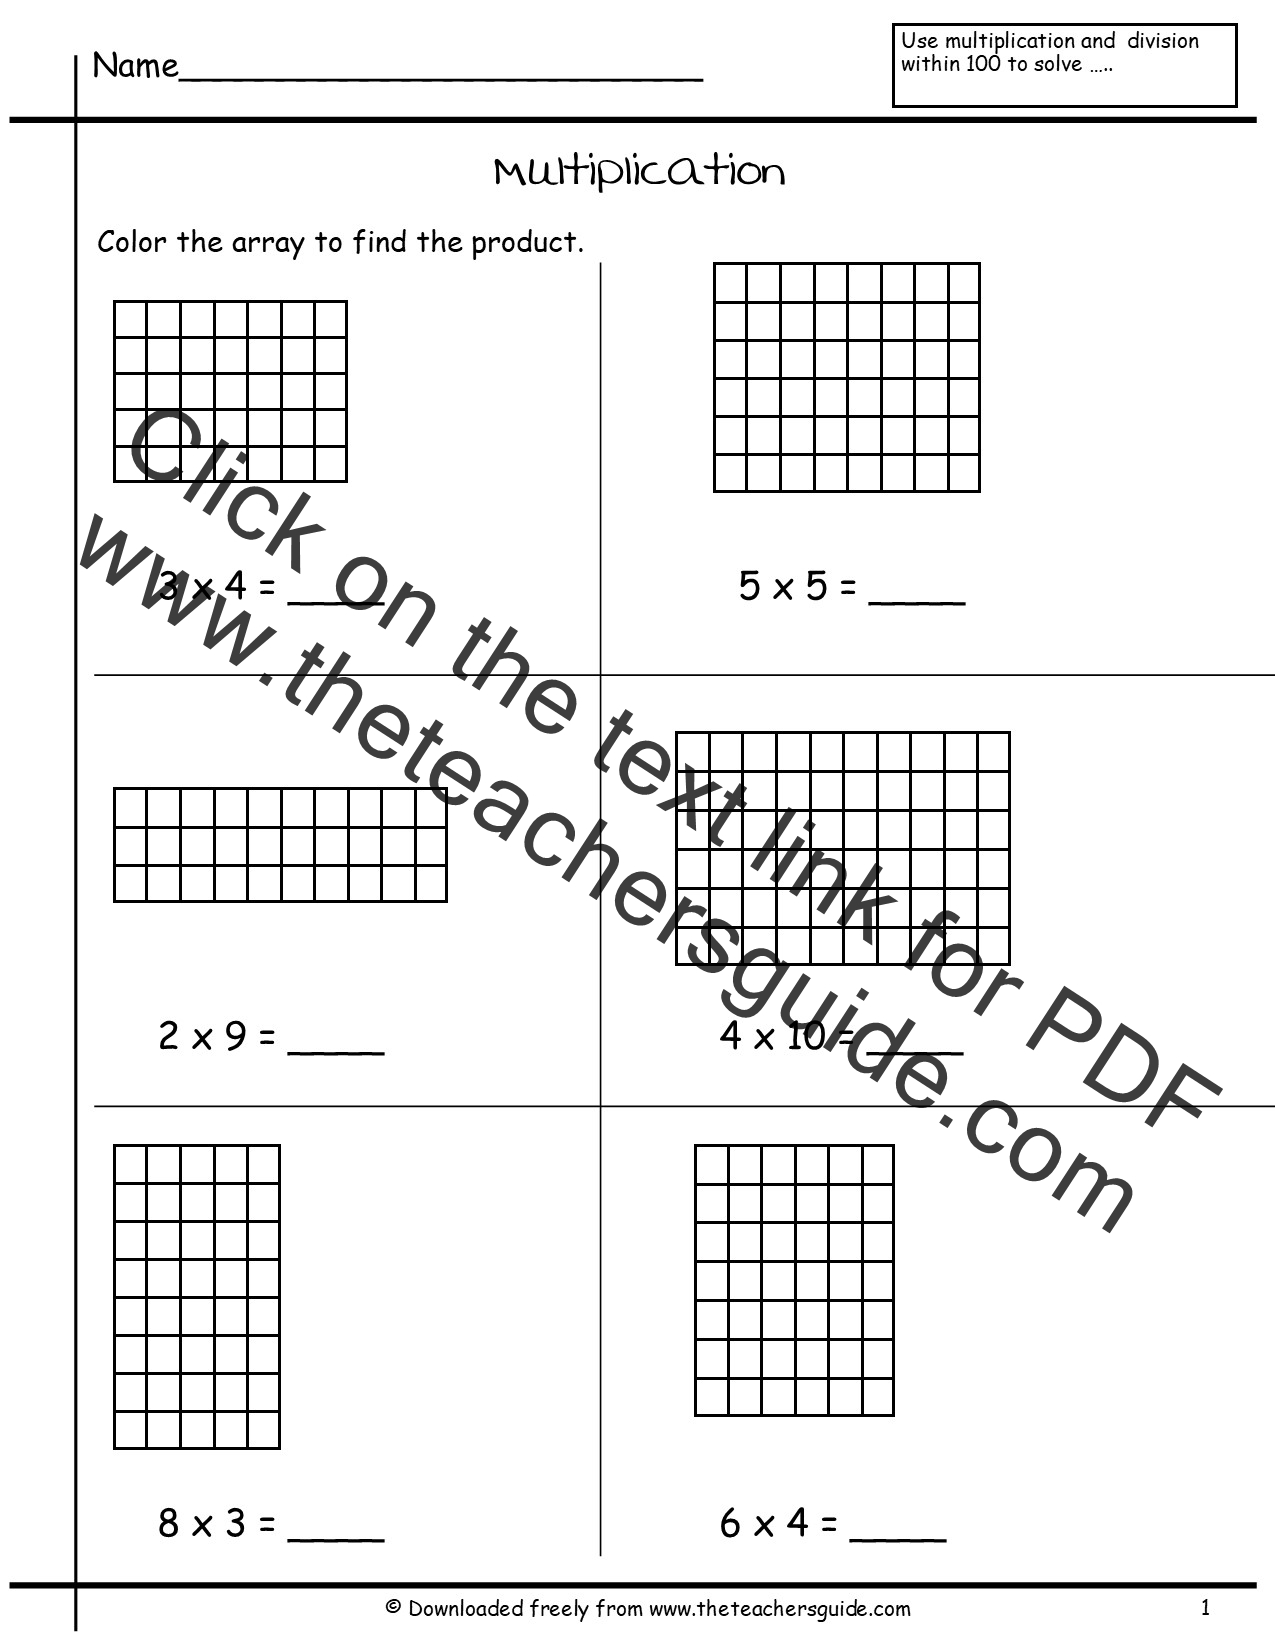 Writing Multiplication From Arrays Worksheet